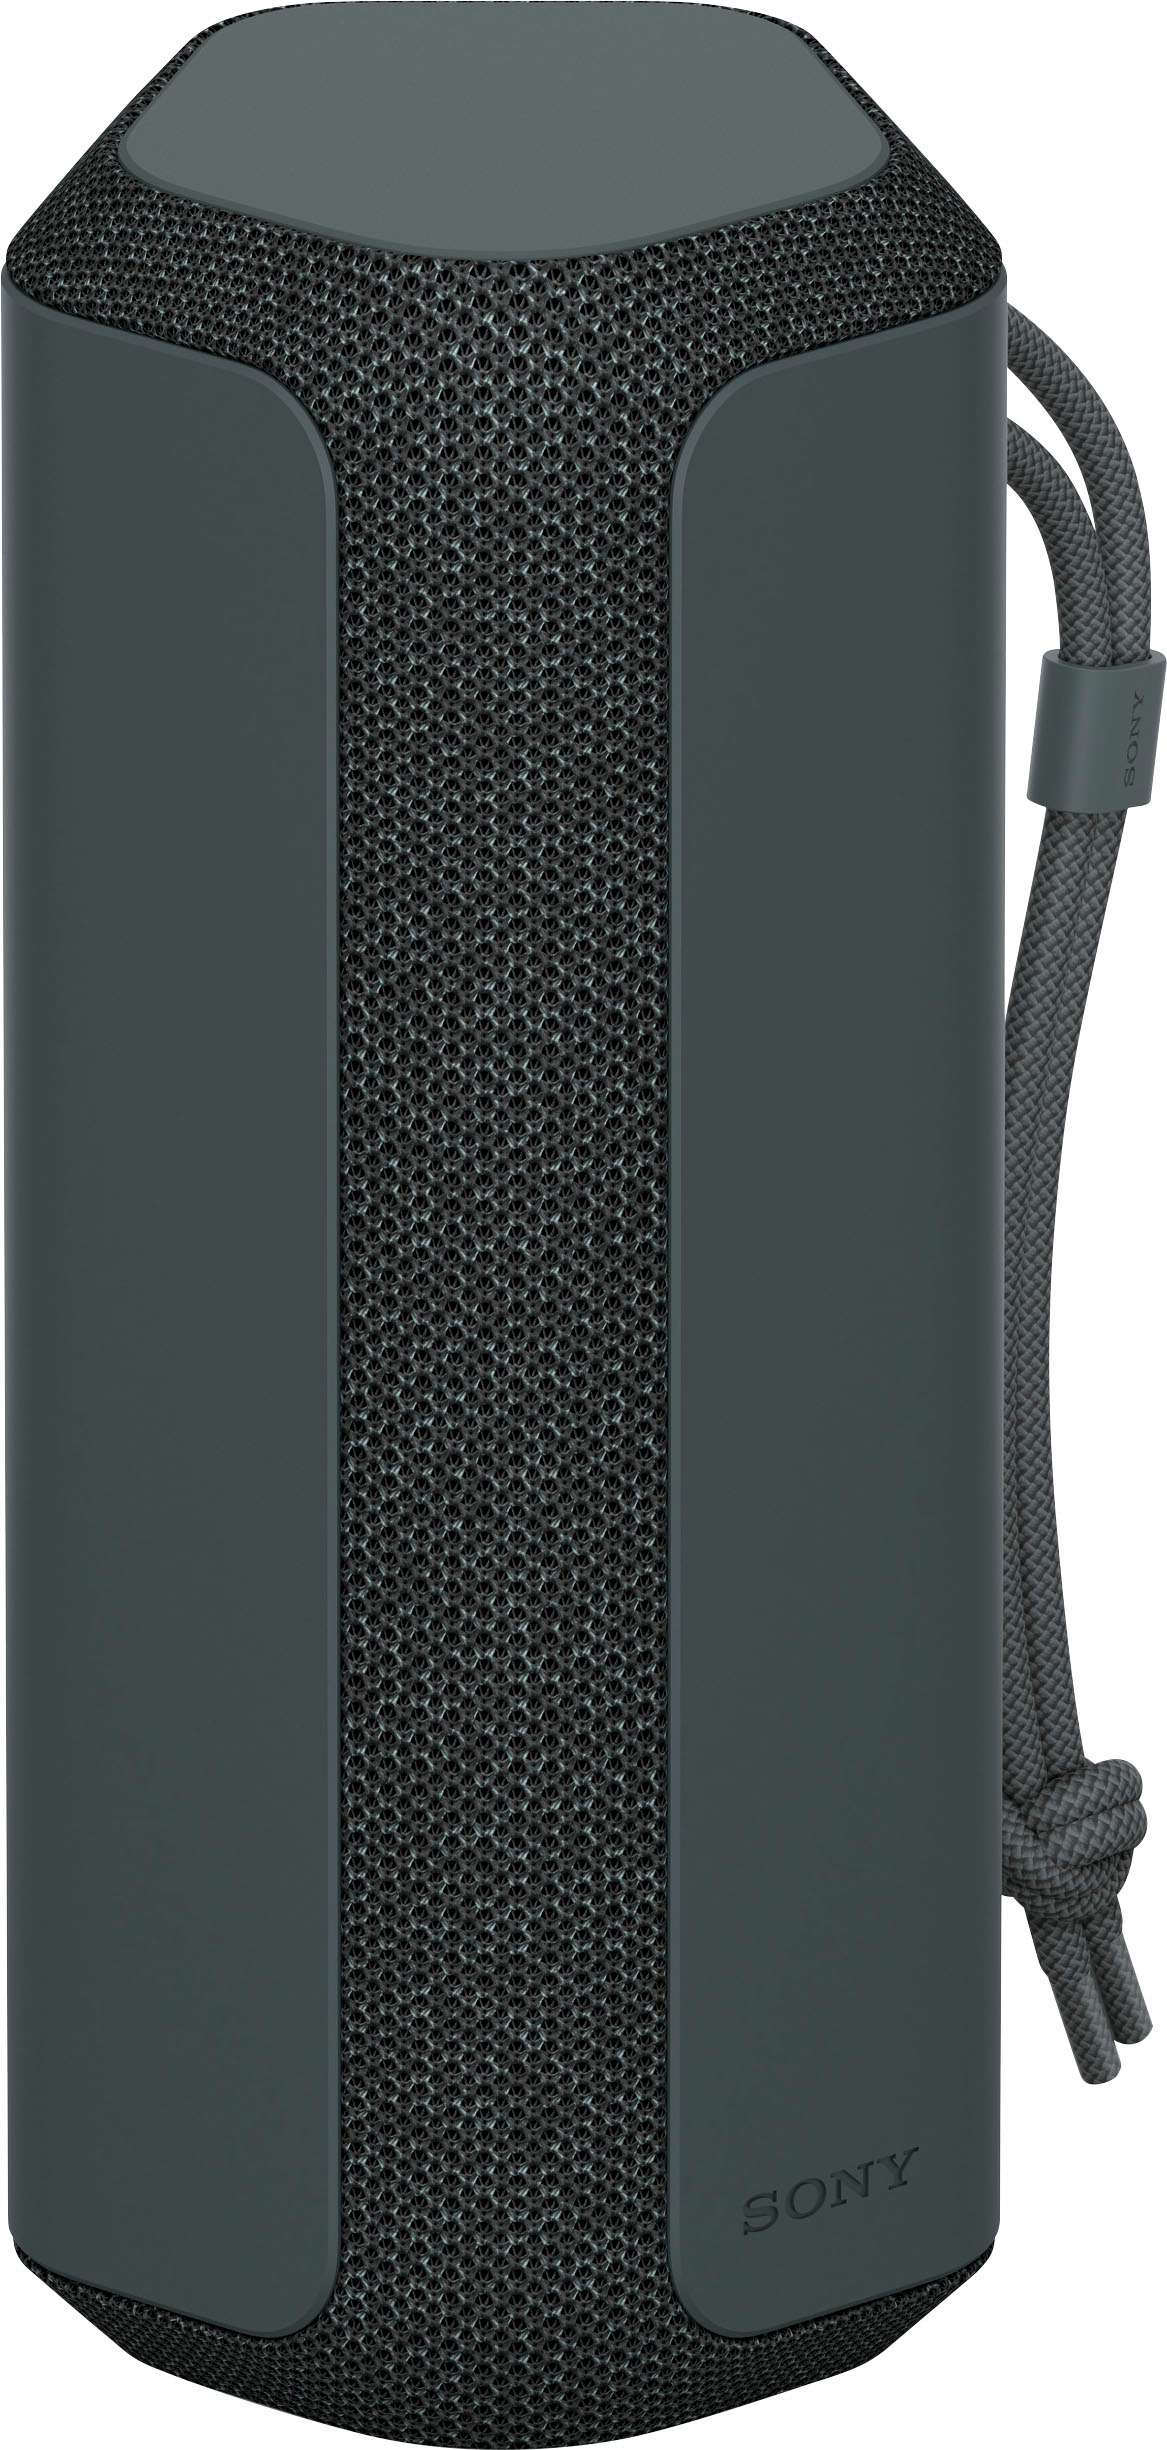 Angle View: Sony - XE200 Portable Waterproof and Dustproof Bluetooth Speaker - Black